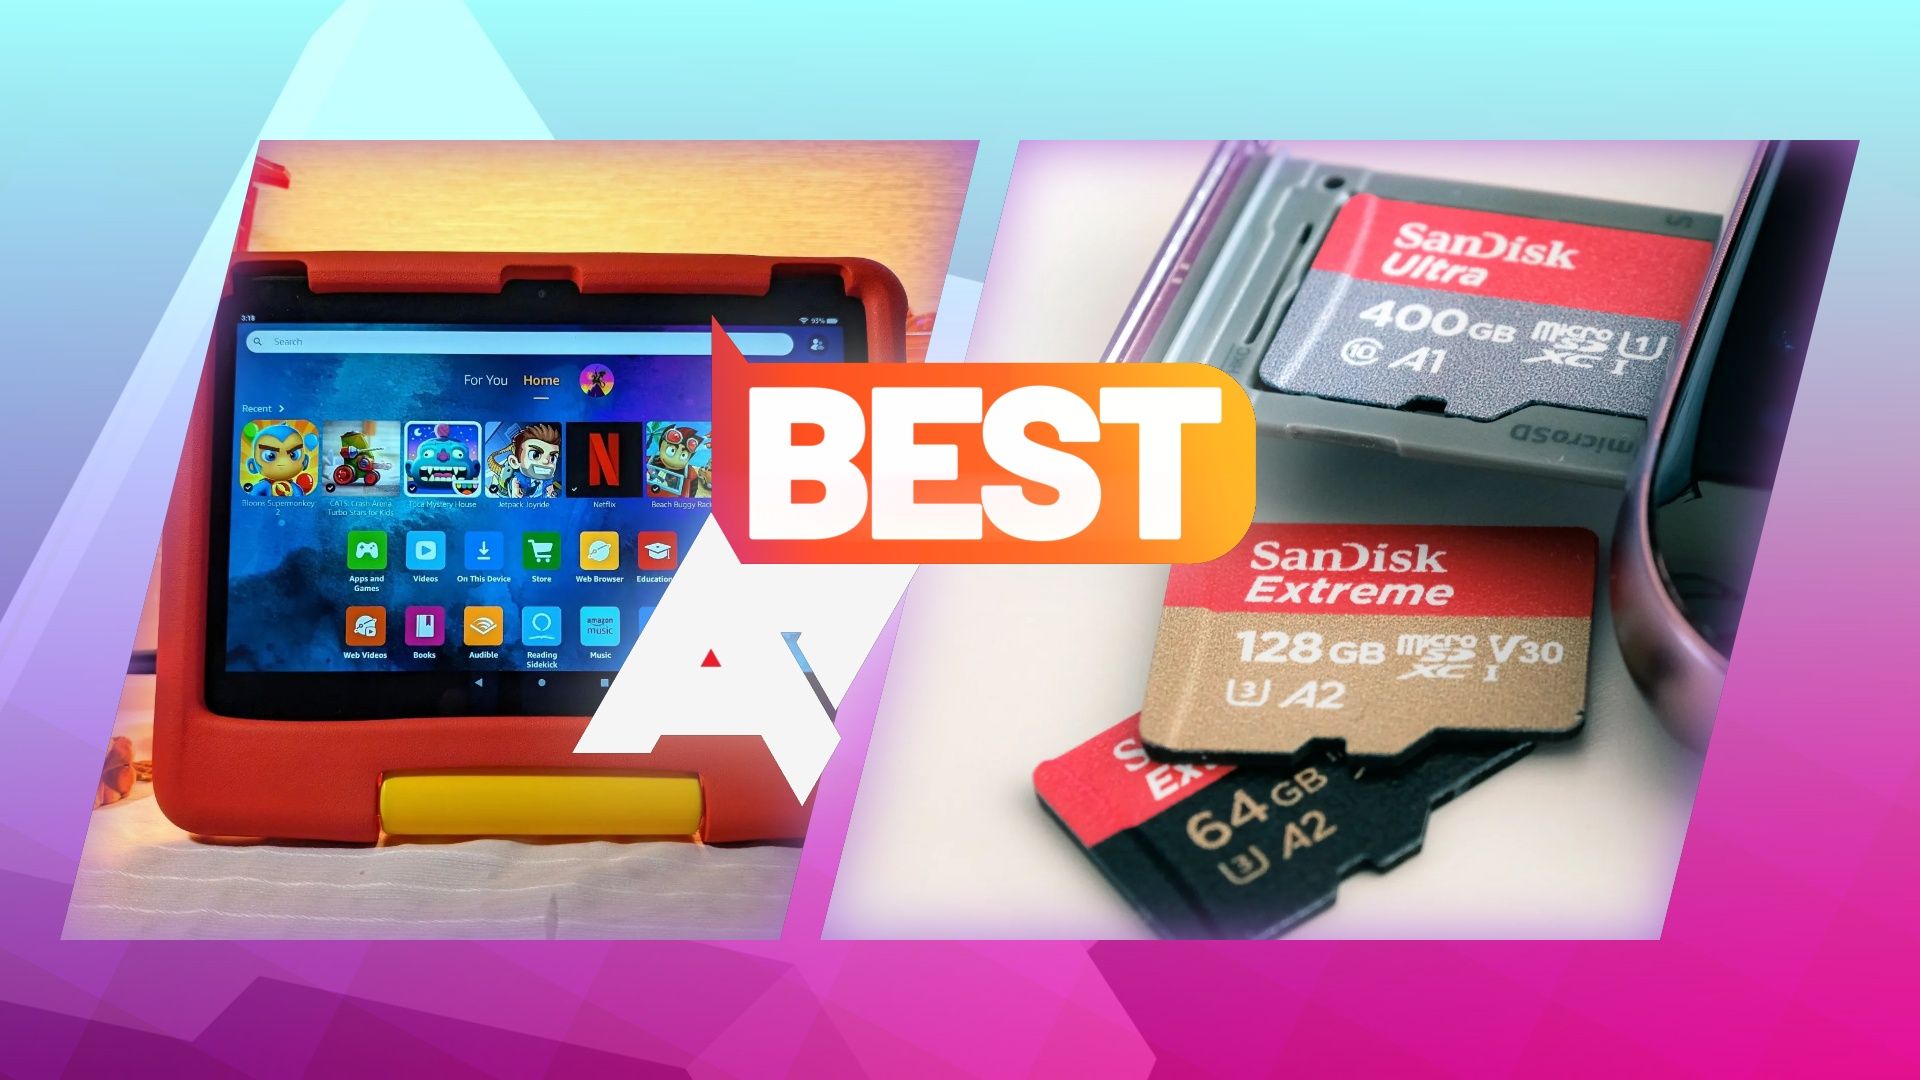 Photos of an Amazon Fire Tablet for Kids and a selection of SanDisk microSD cards, with an 'AP Best' logo on top